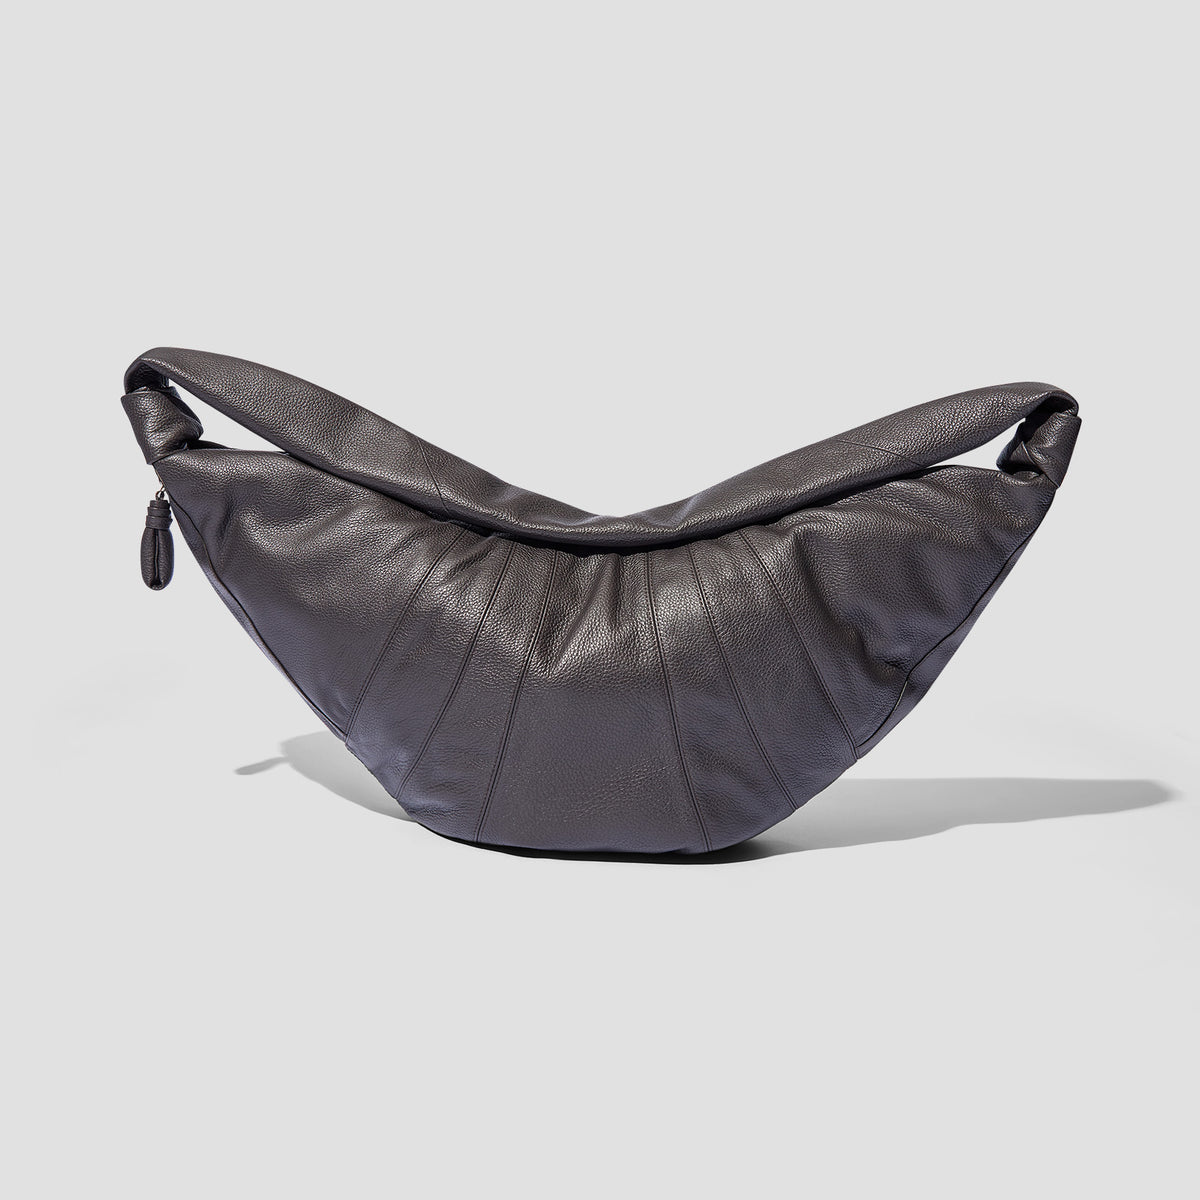 LEMAIRE LARGE CROISSANT BAG - SOFT GRAINED LEATHER BG0000 LL0018 brown ...